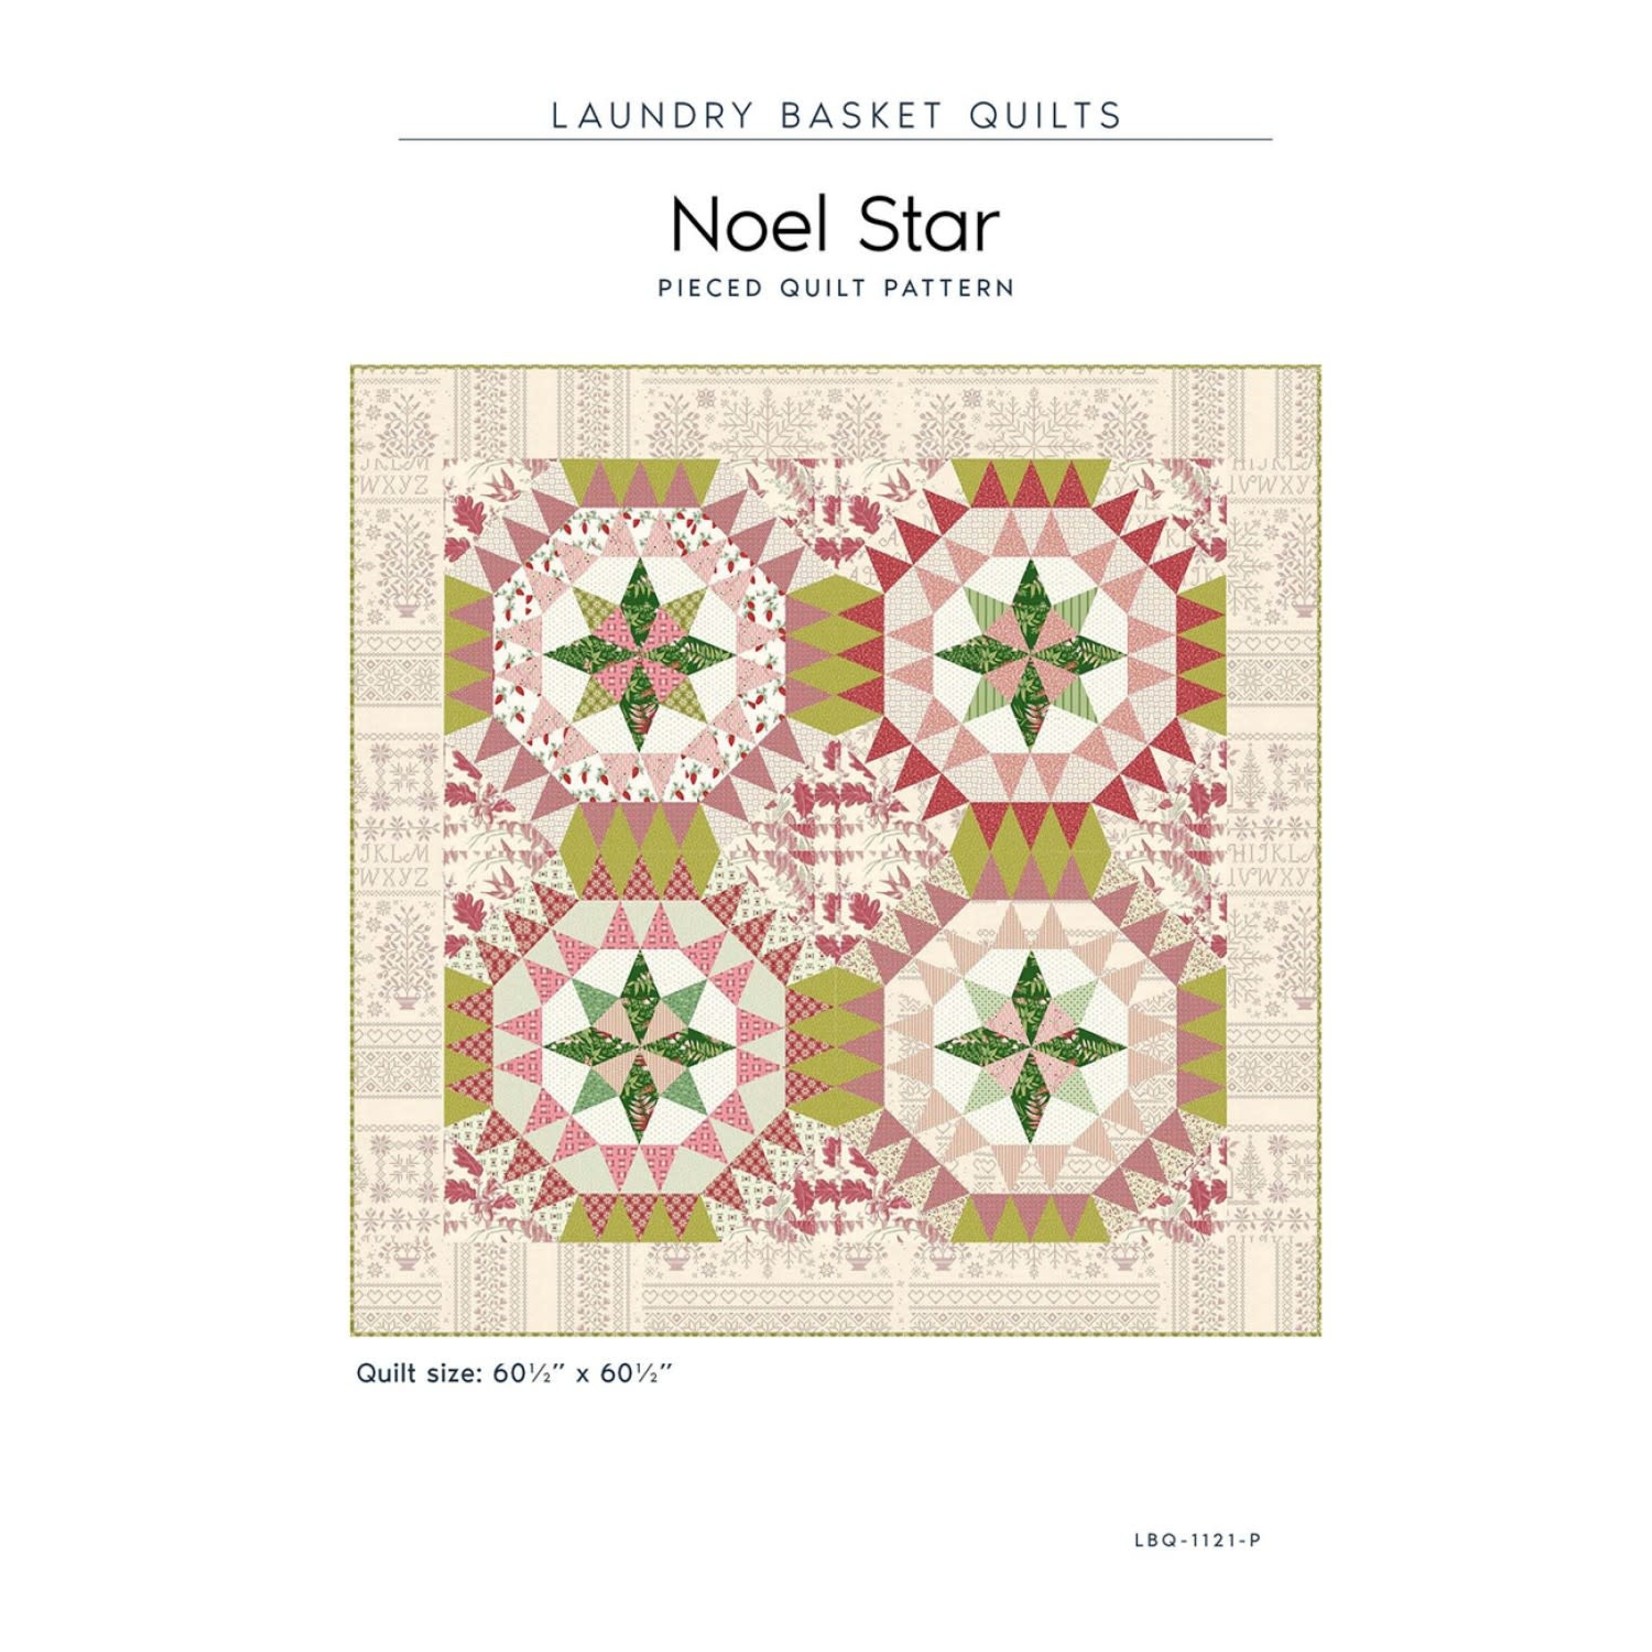 Laundry Basket Quilts Noel Star Quilt Kit (back not included)1 light fabric substituted